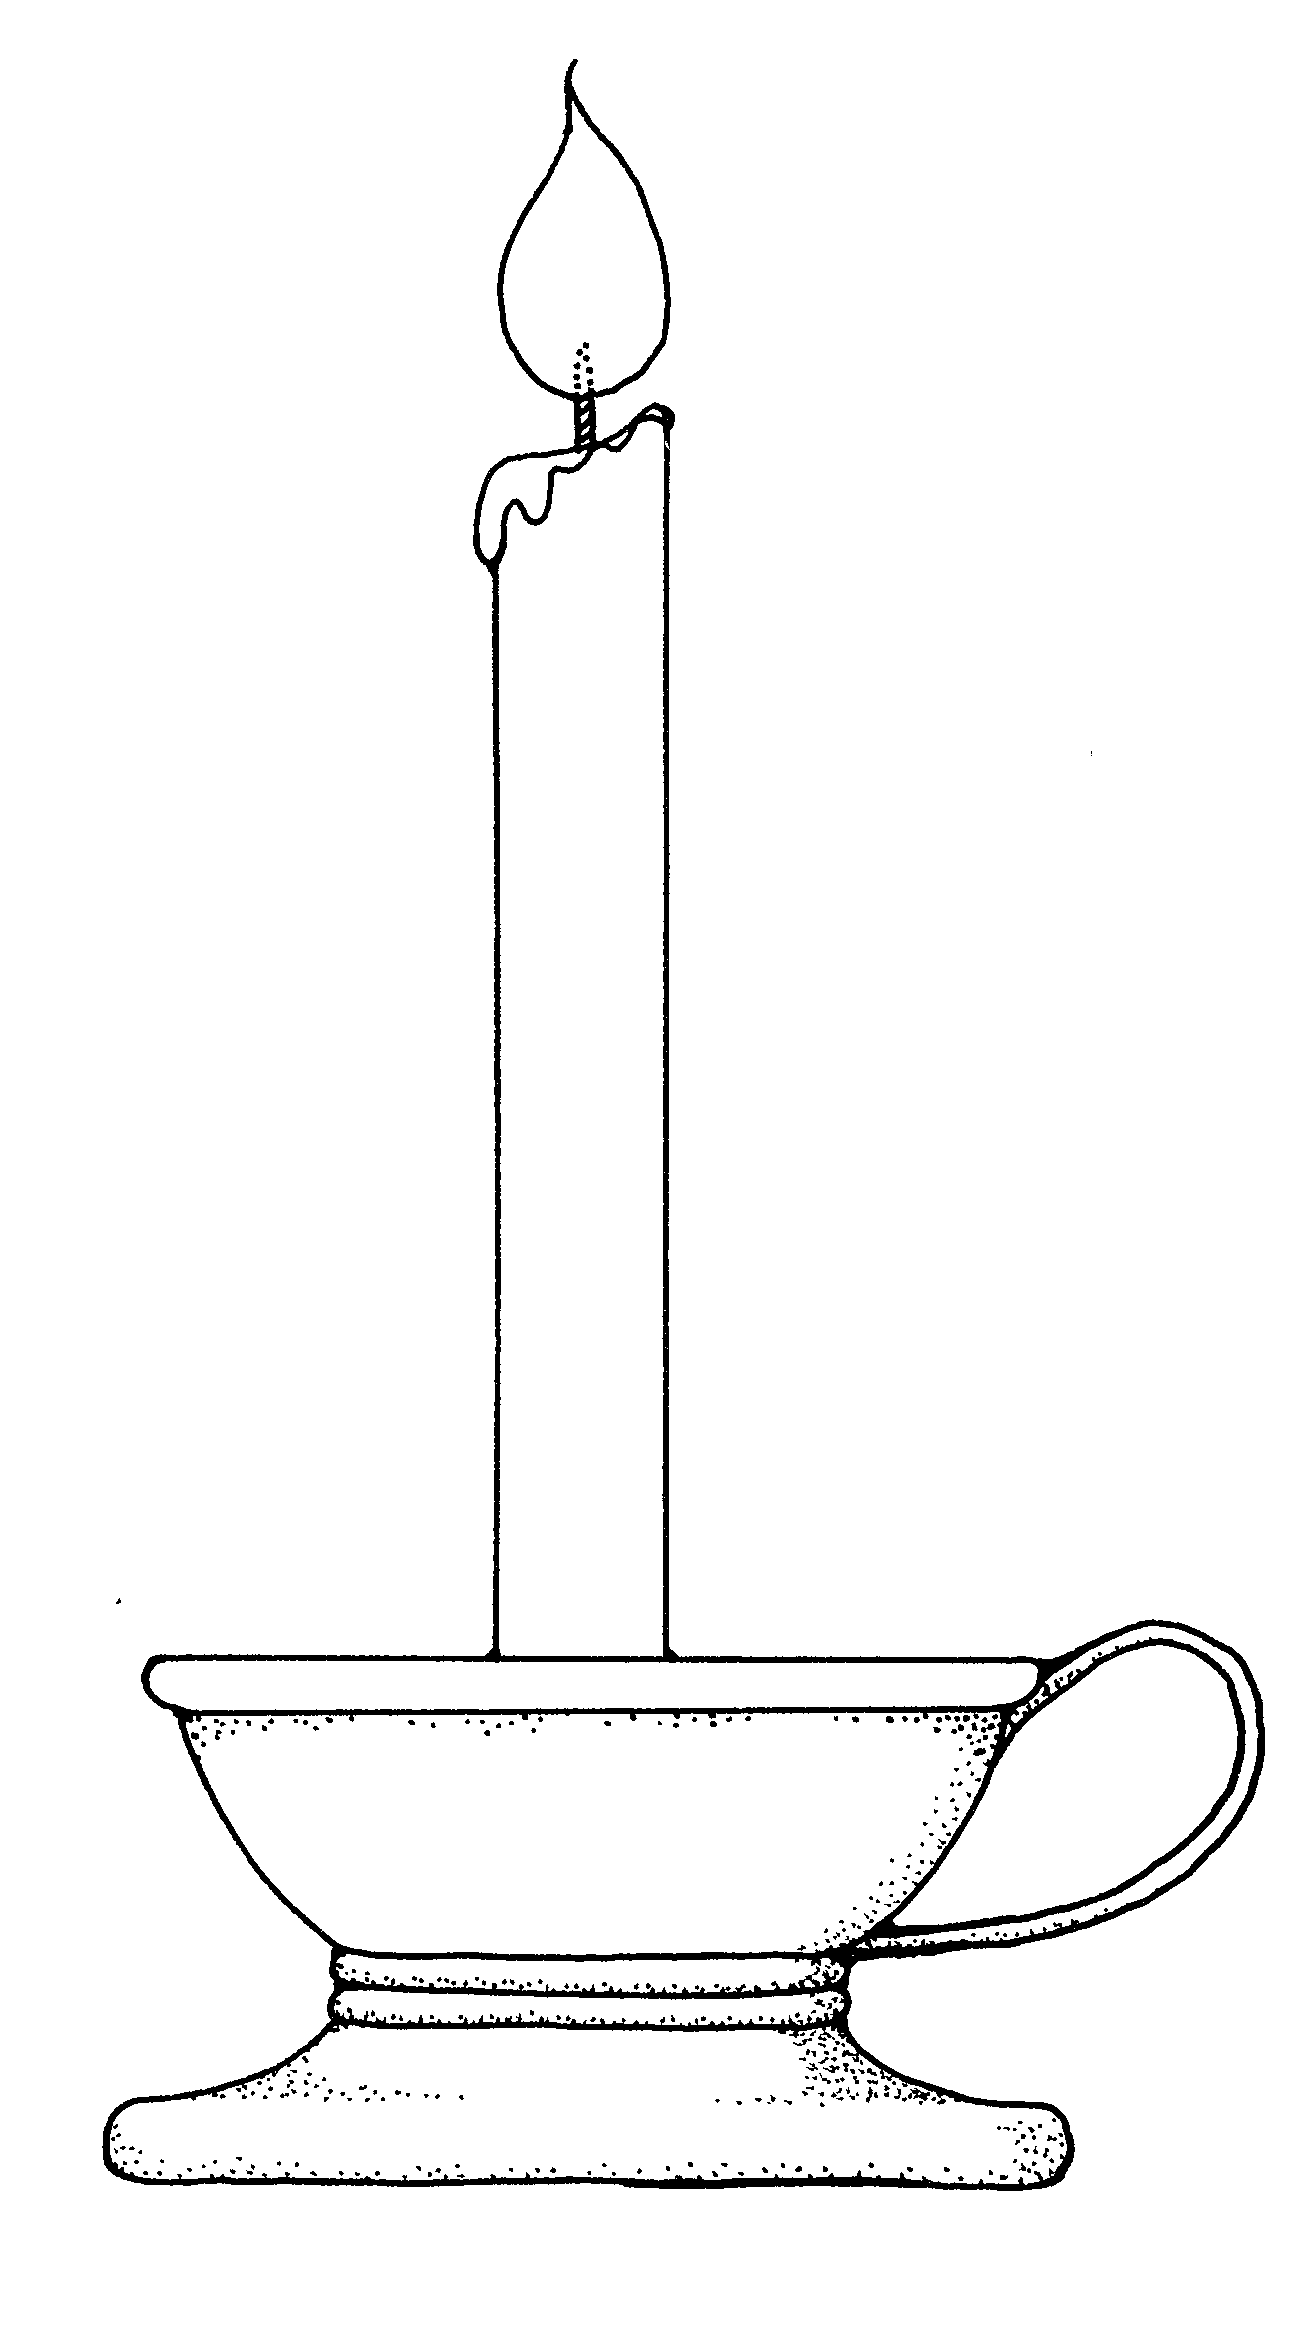 Black and white clipart picture of a candle church candle